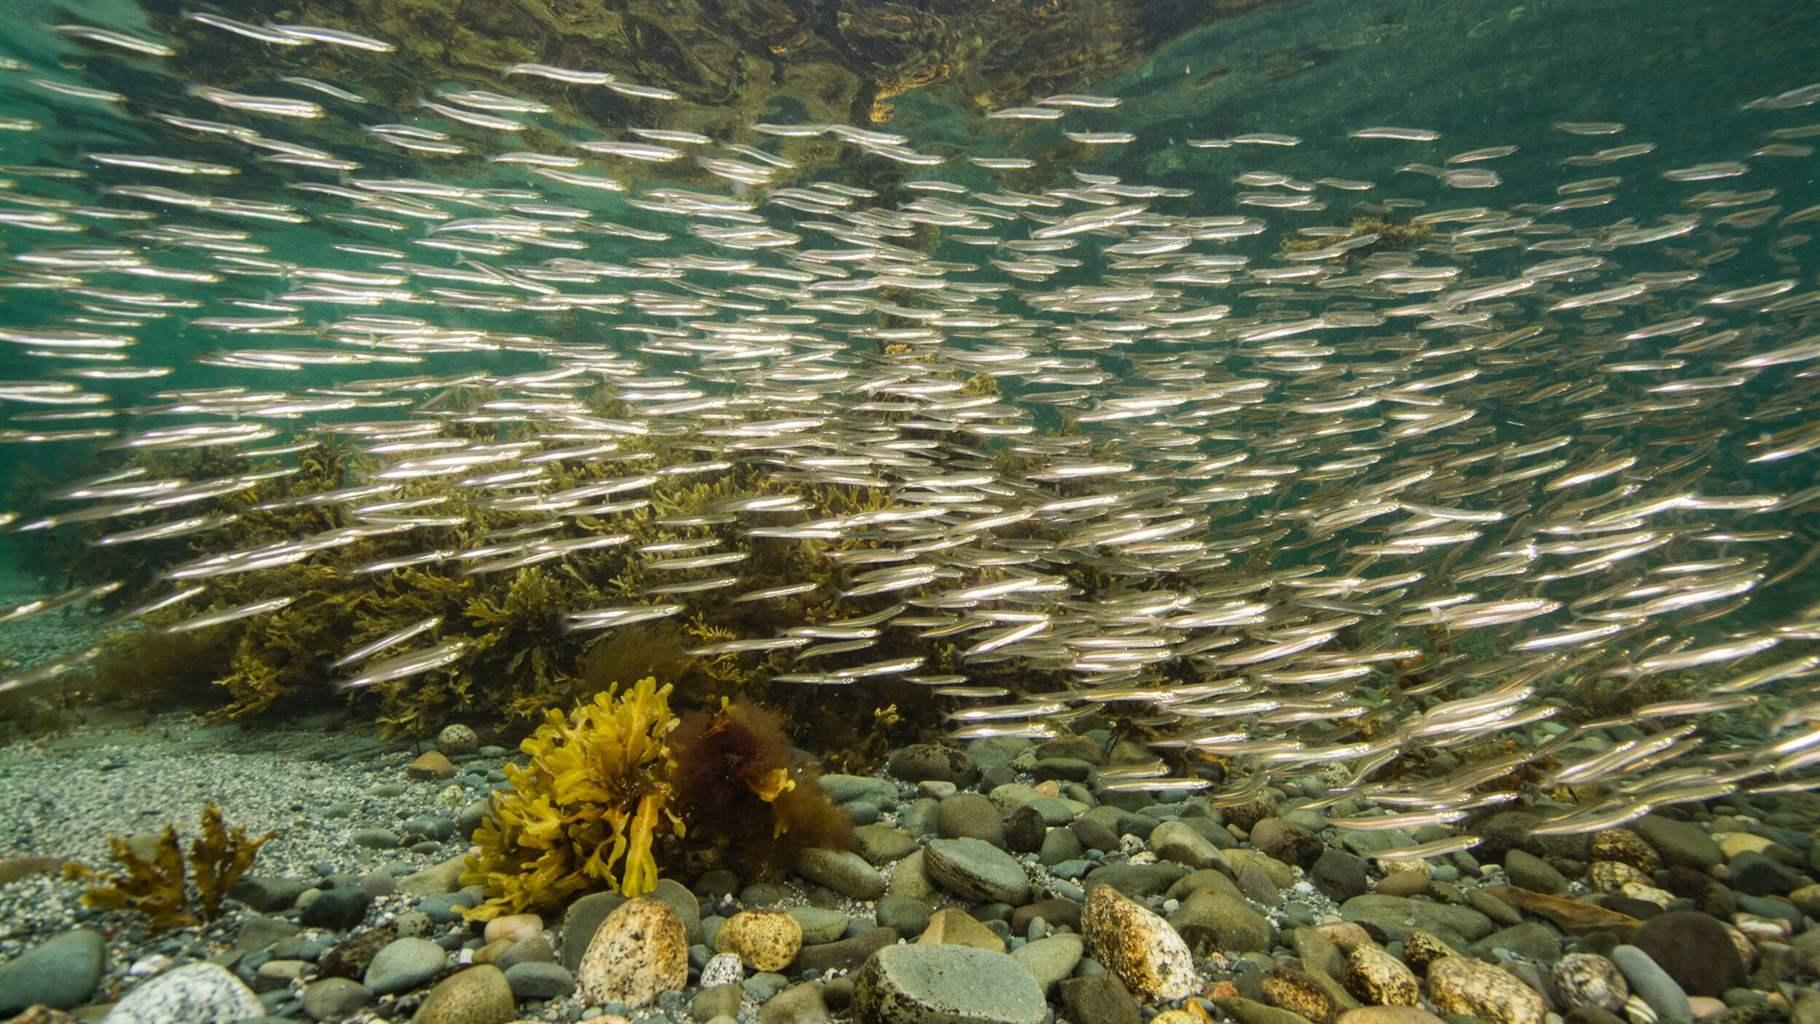 Canada's New Fisheries Act Will Help Ecosystem and People